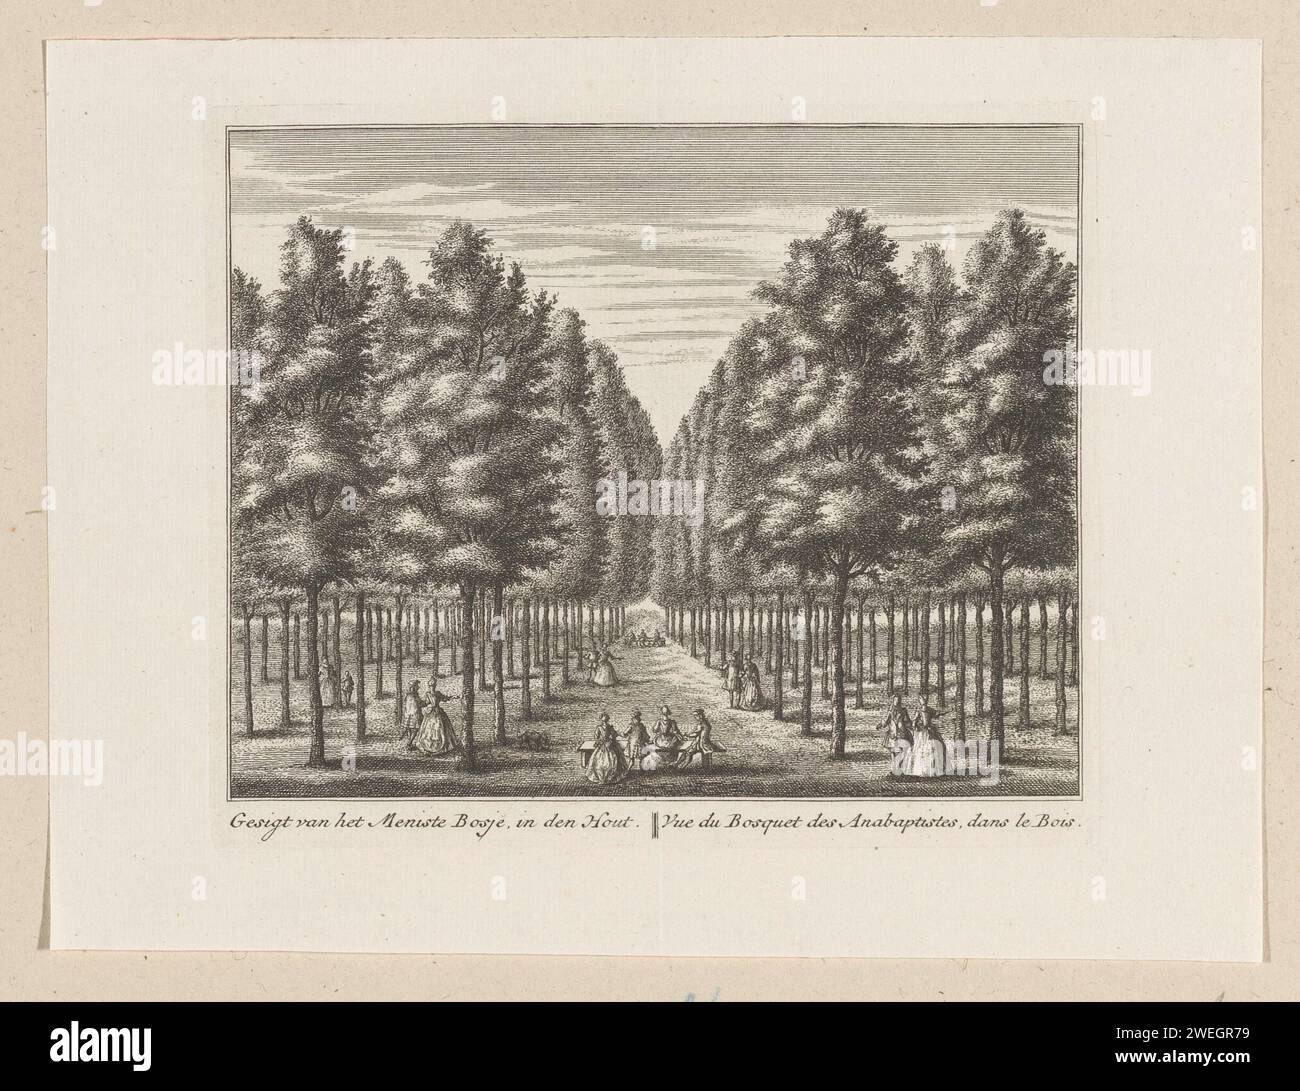 View of the Mennistenbosje in the Alkmaarder Hout, Leonard Schenk, After Abraham Rademaker, 1736 - 1746 print View of the Mennistenbosje in the Alkmaarder wood. Baptists met here in the seventeenth century for services.  paper etching forest path or lane (+ landscape with figures, staffage) Alkmaarder wood Stock Photo